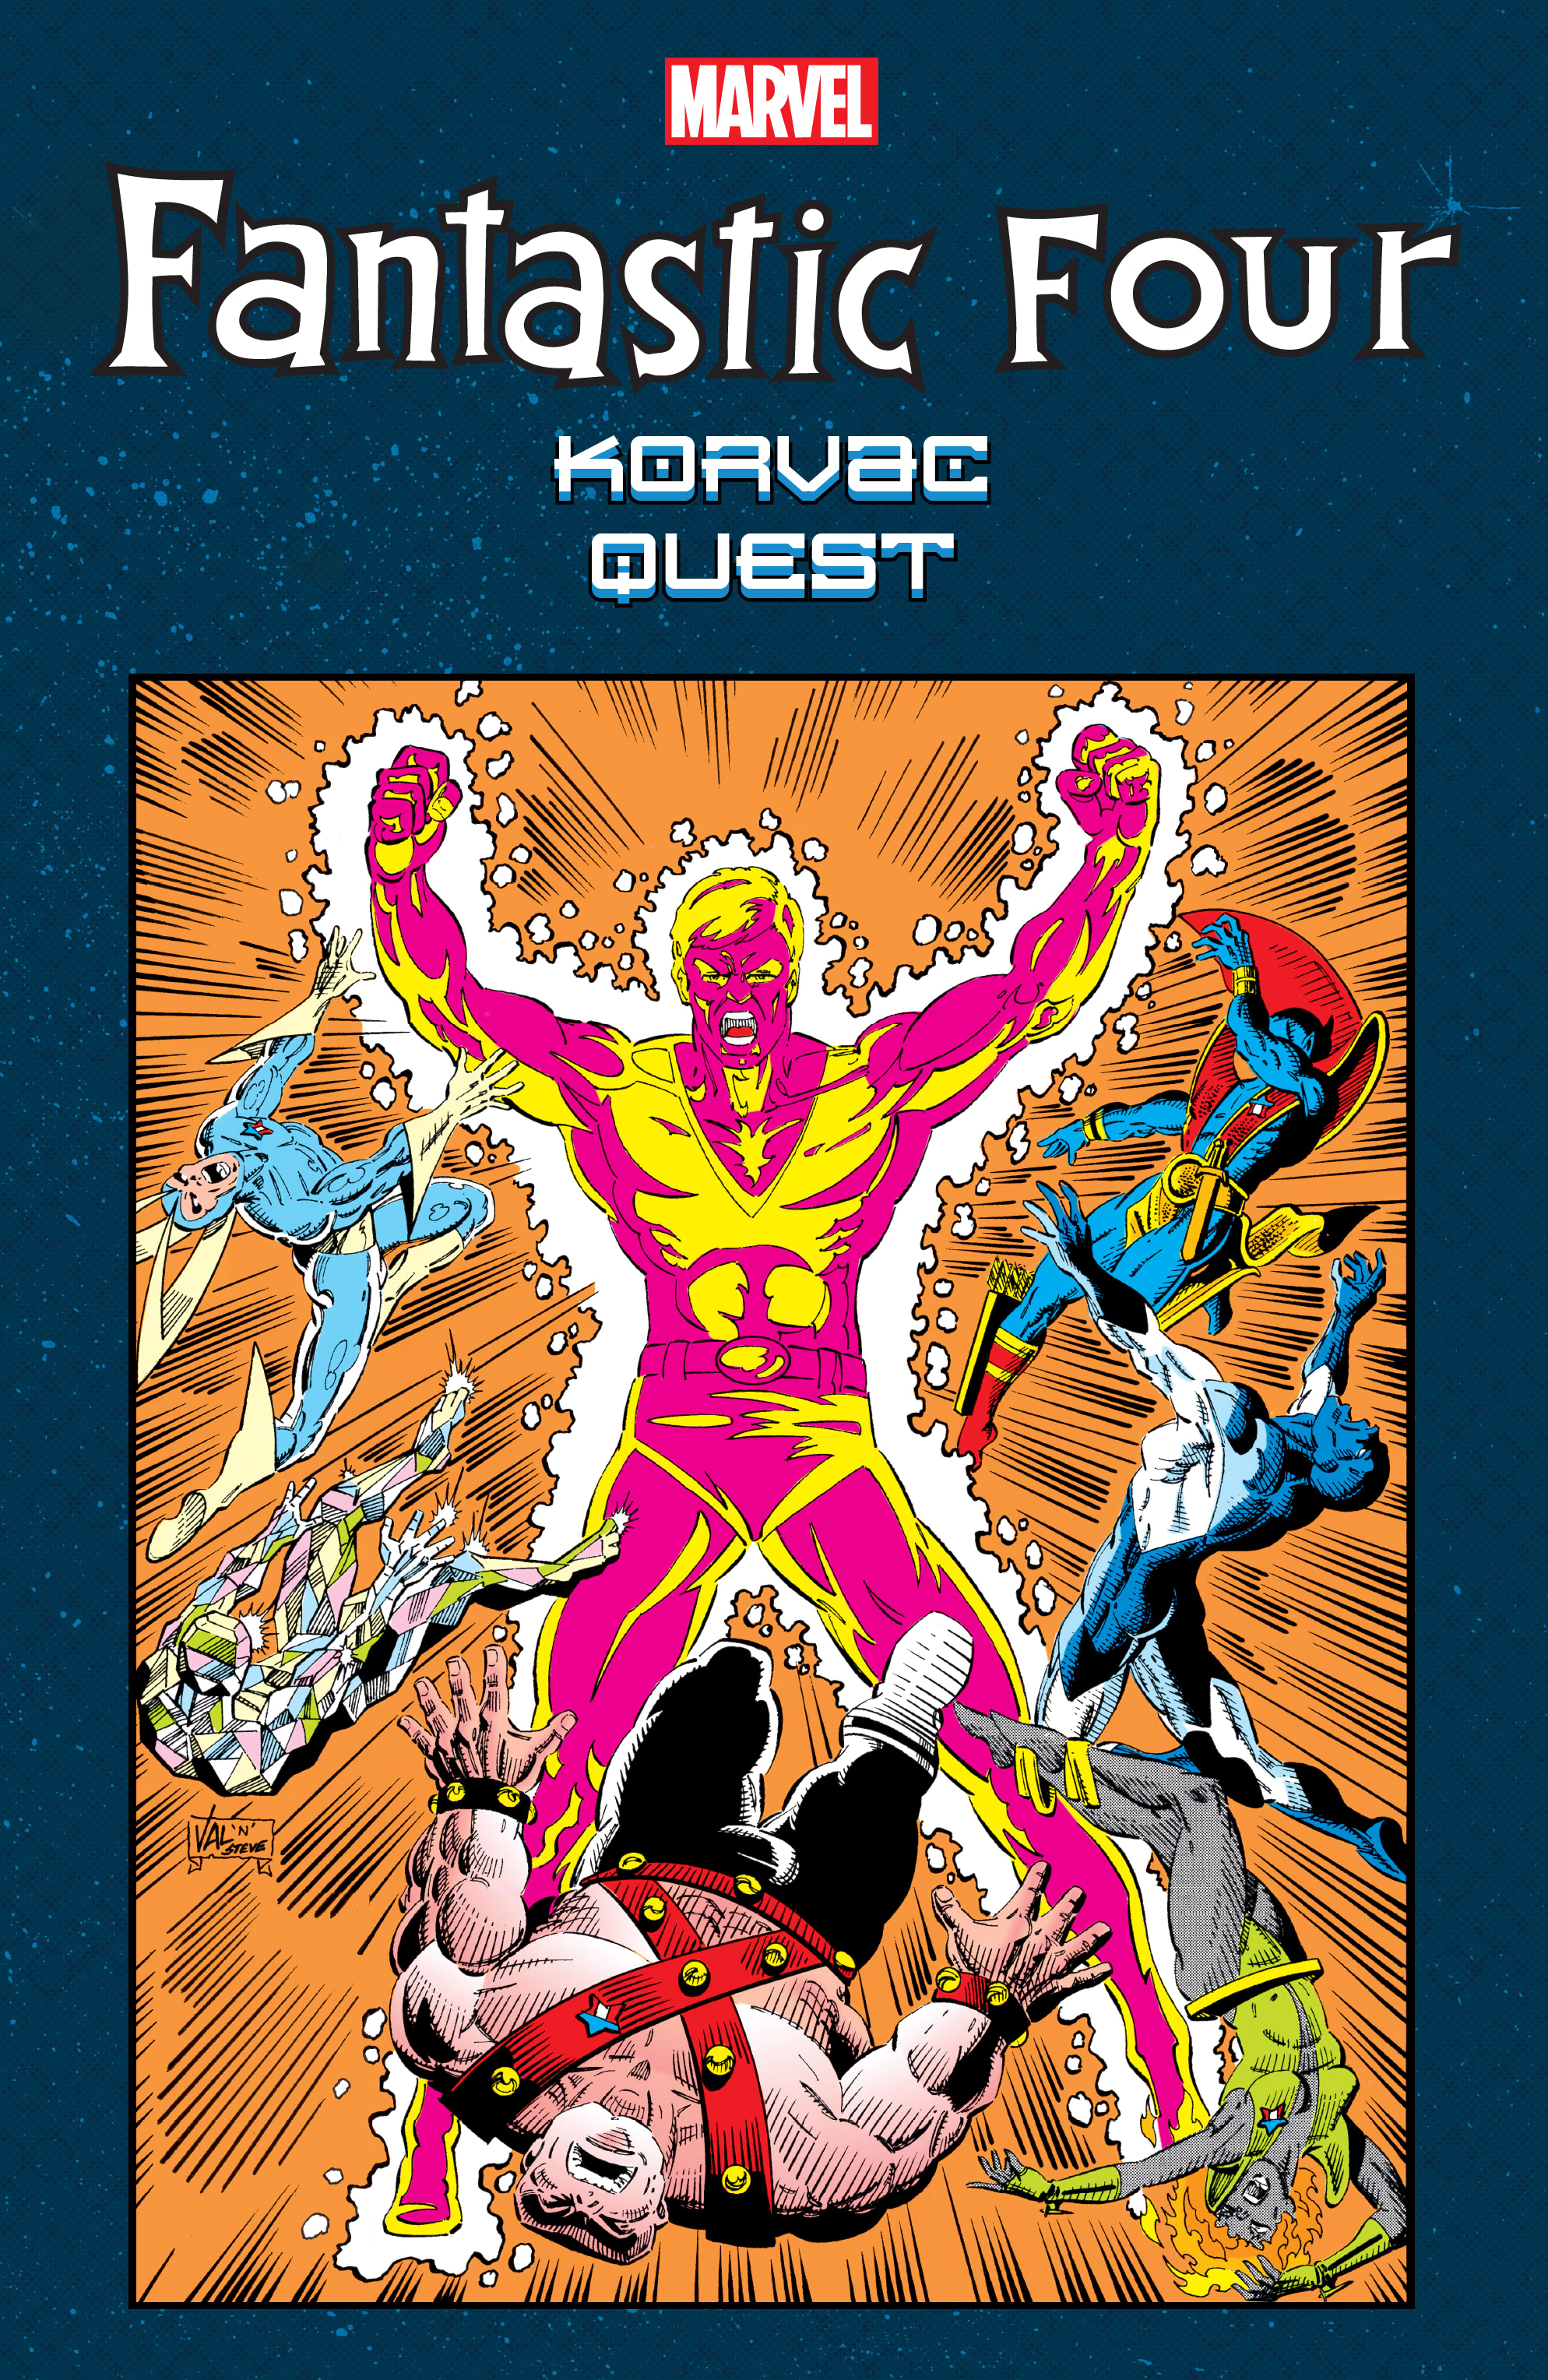 Read online Fantastic Four: Korvac Quest comic -  Issue # TPB - 1